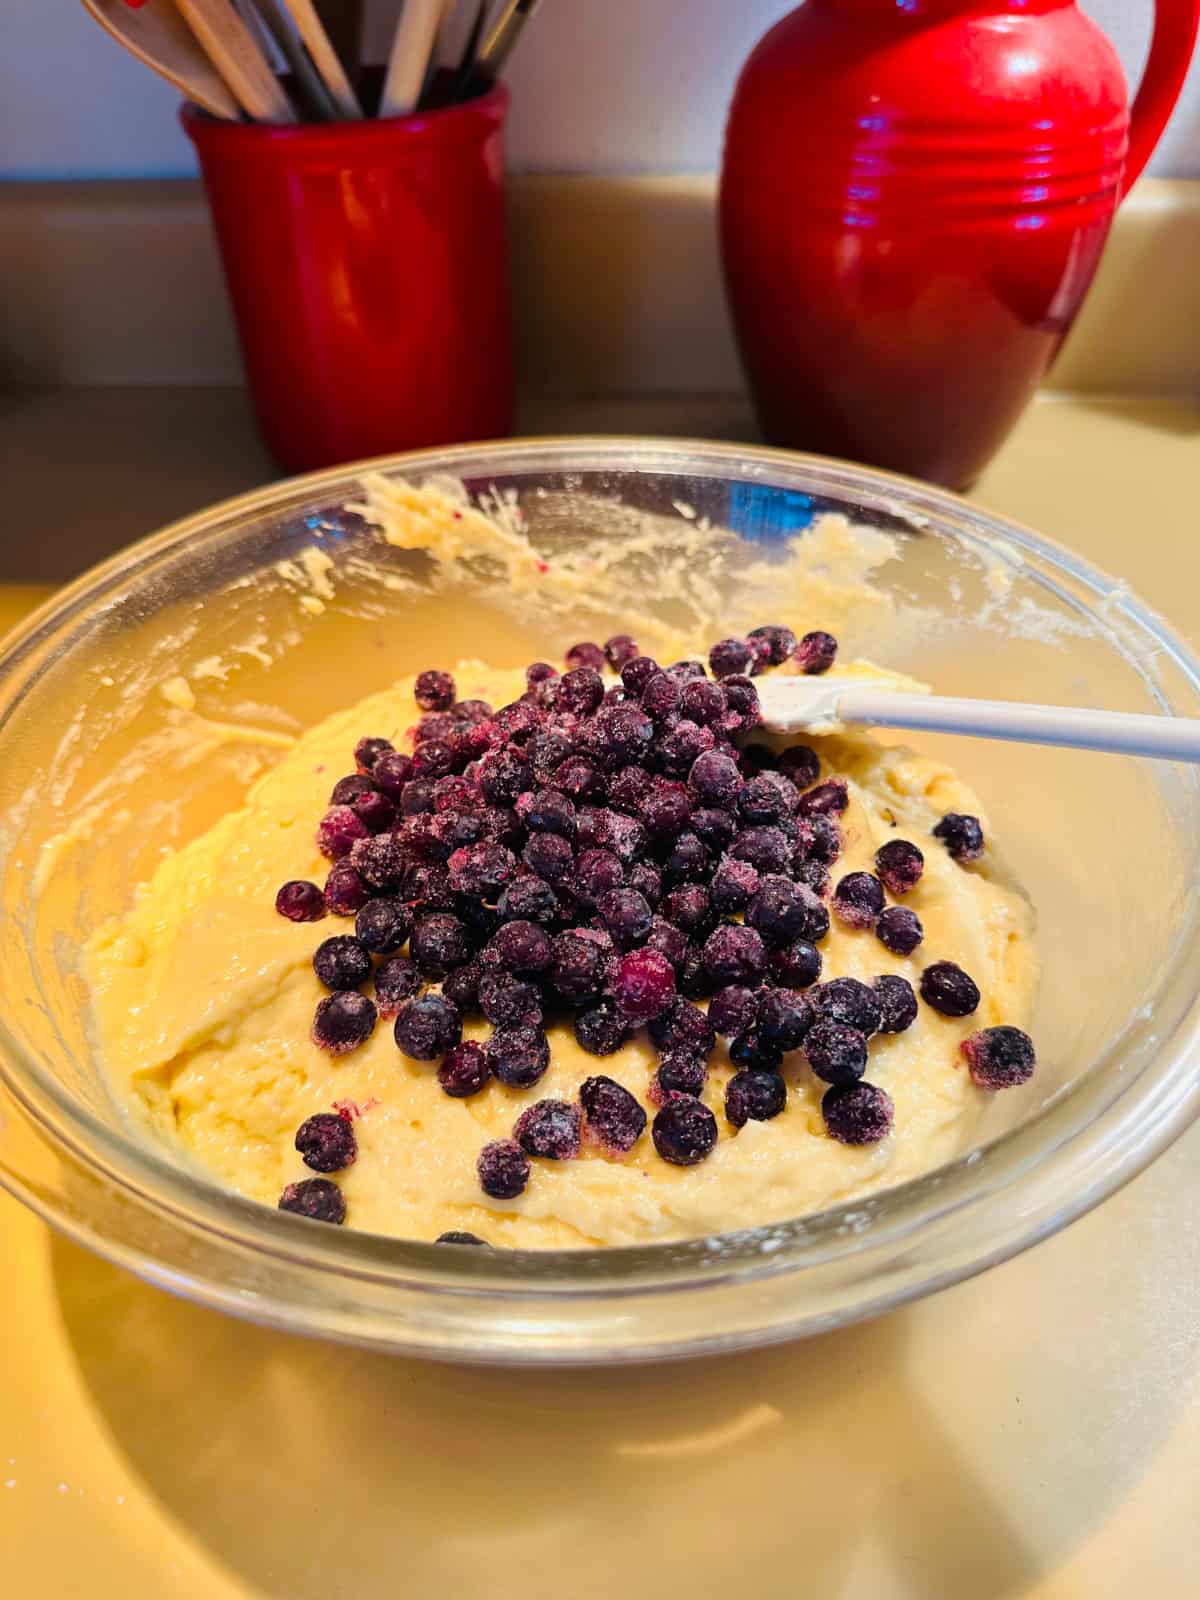 Muffin batter with berries added in a glass bowl.